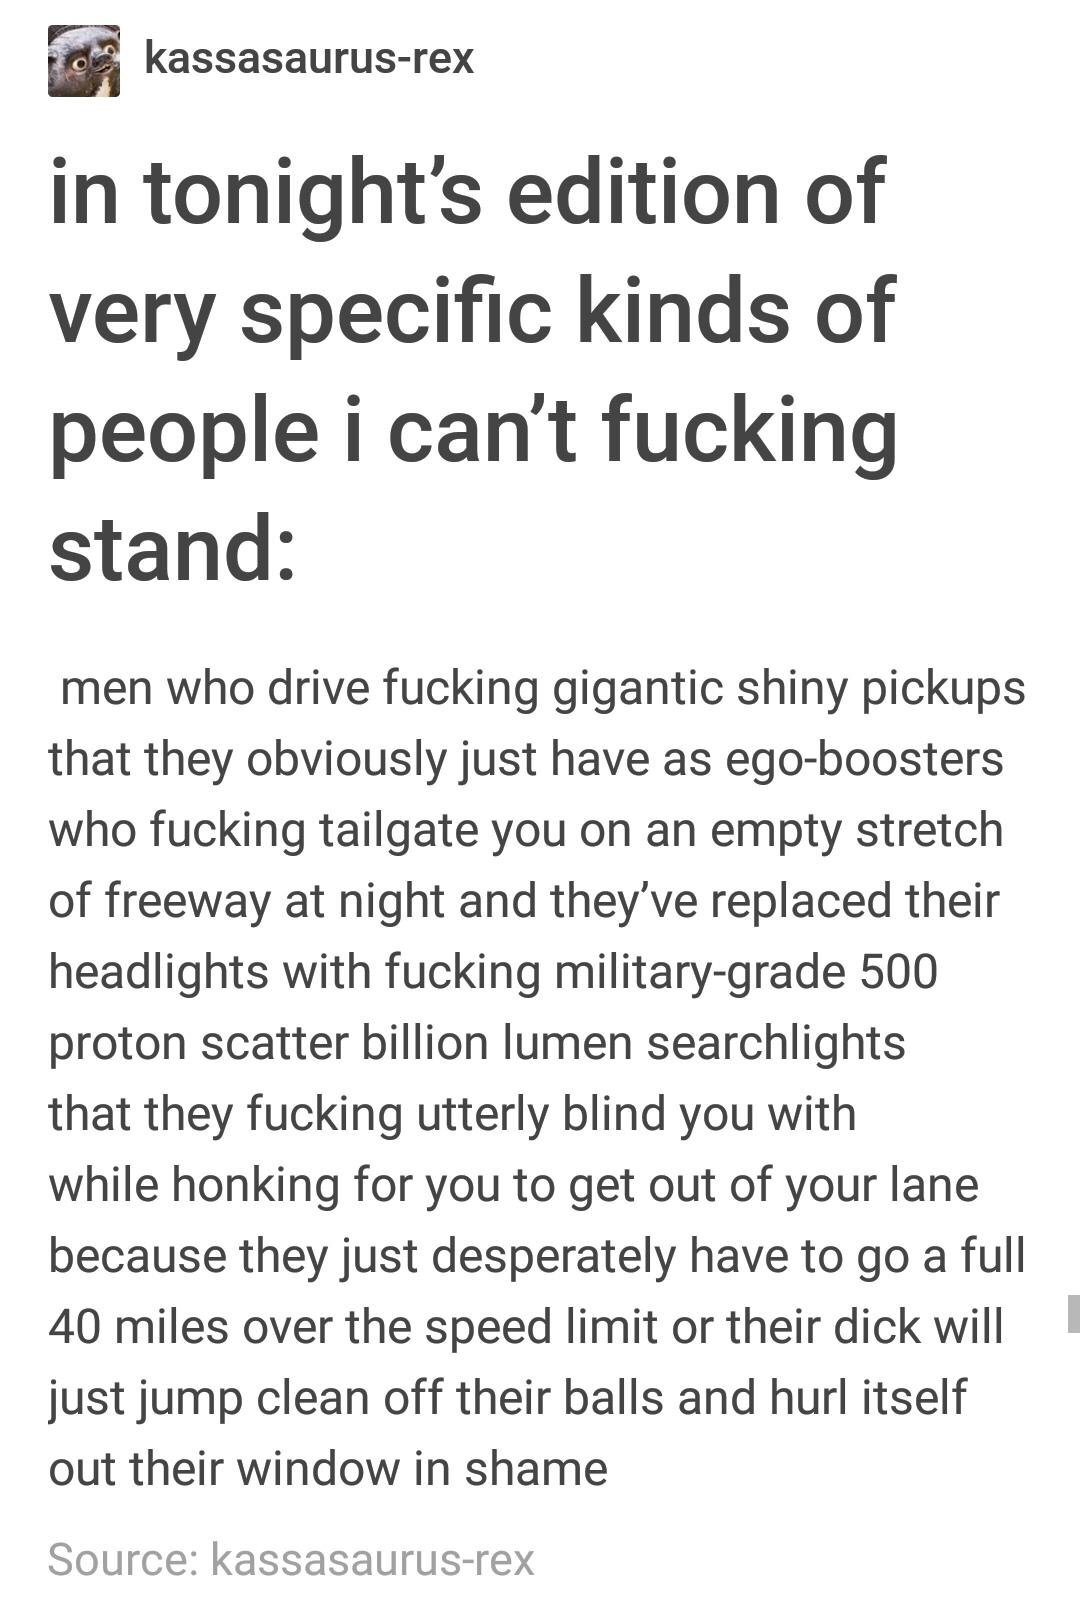 can t stand people - kassasaurusrex in tonight's edition of very specific kinds of people i can't fucking stand men who drive fucking gigantic shiny pickups that they obviously just have as egoboosters who fucking tailgate you on an empty stretch of freew